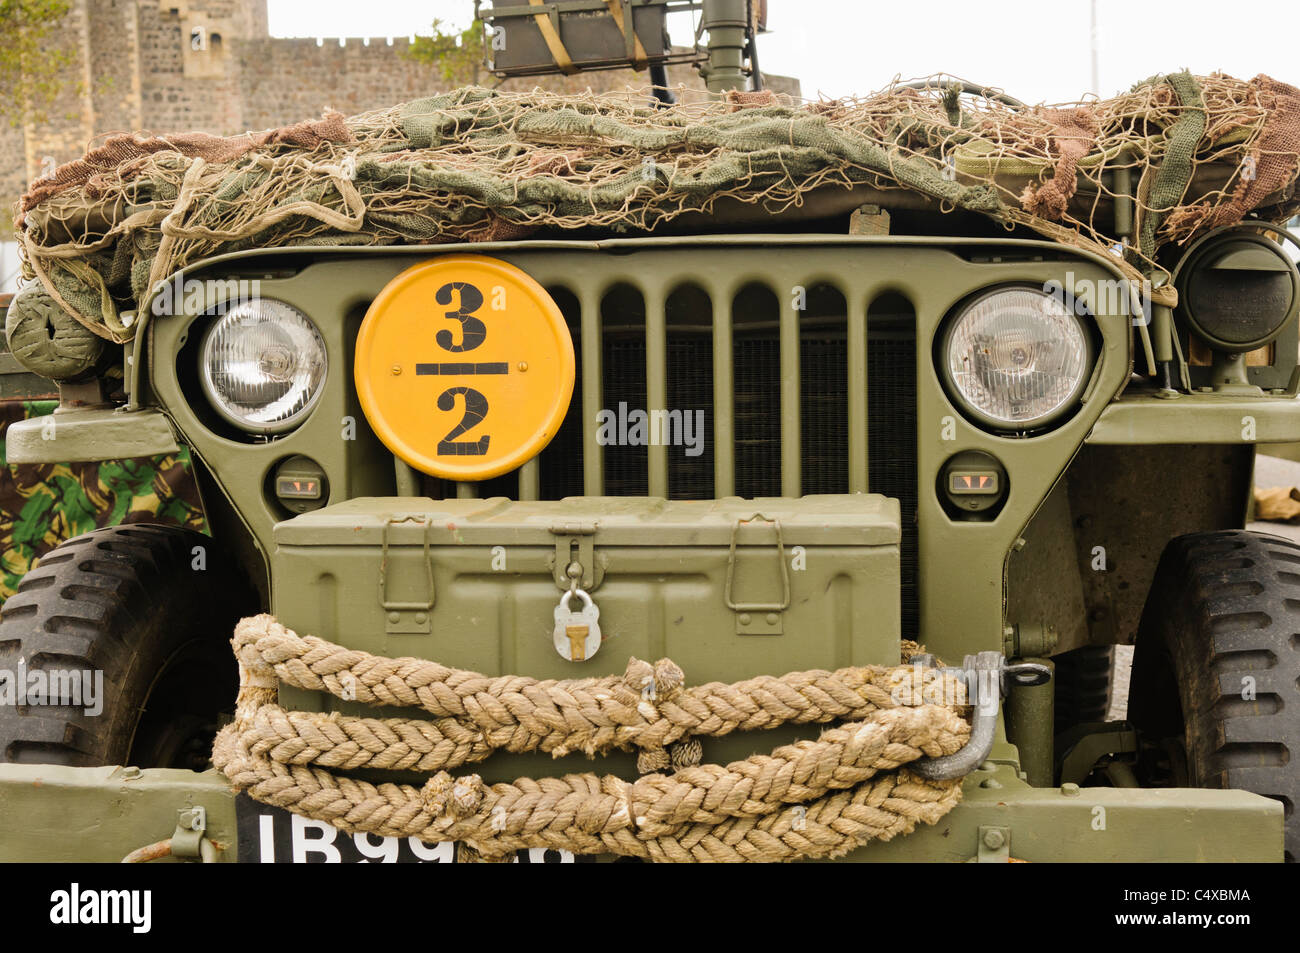 World War II era Jeep built by Ford, using the Willys-Overland design Stock Photo